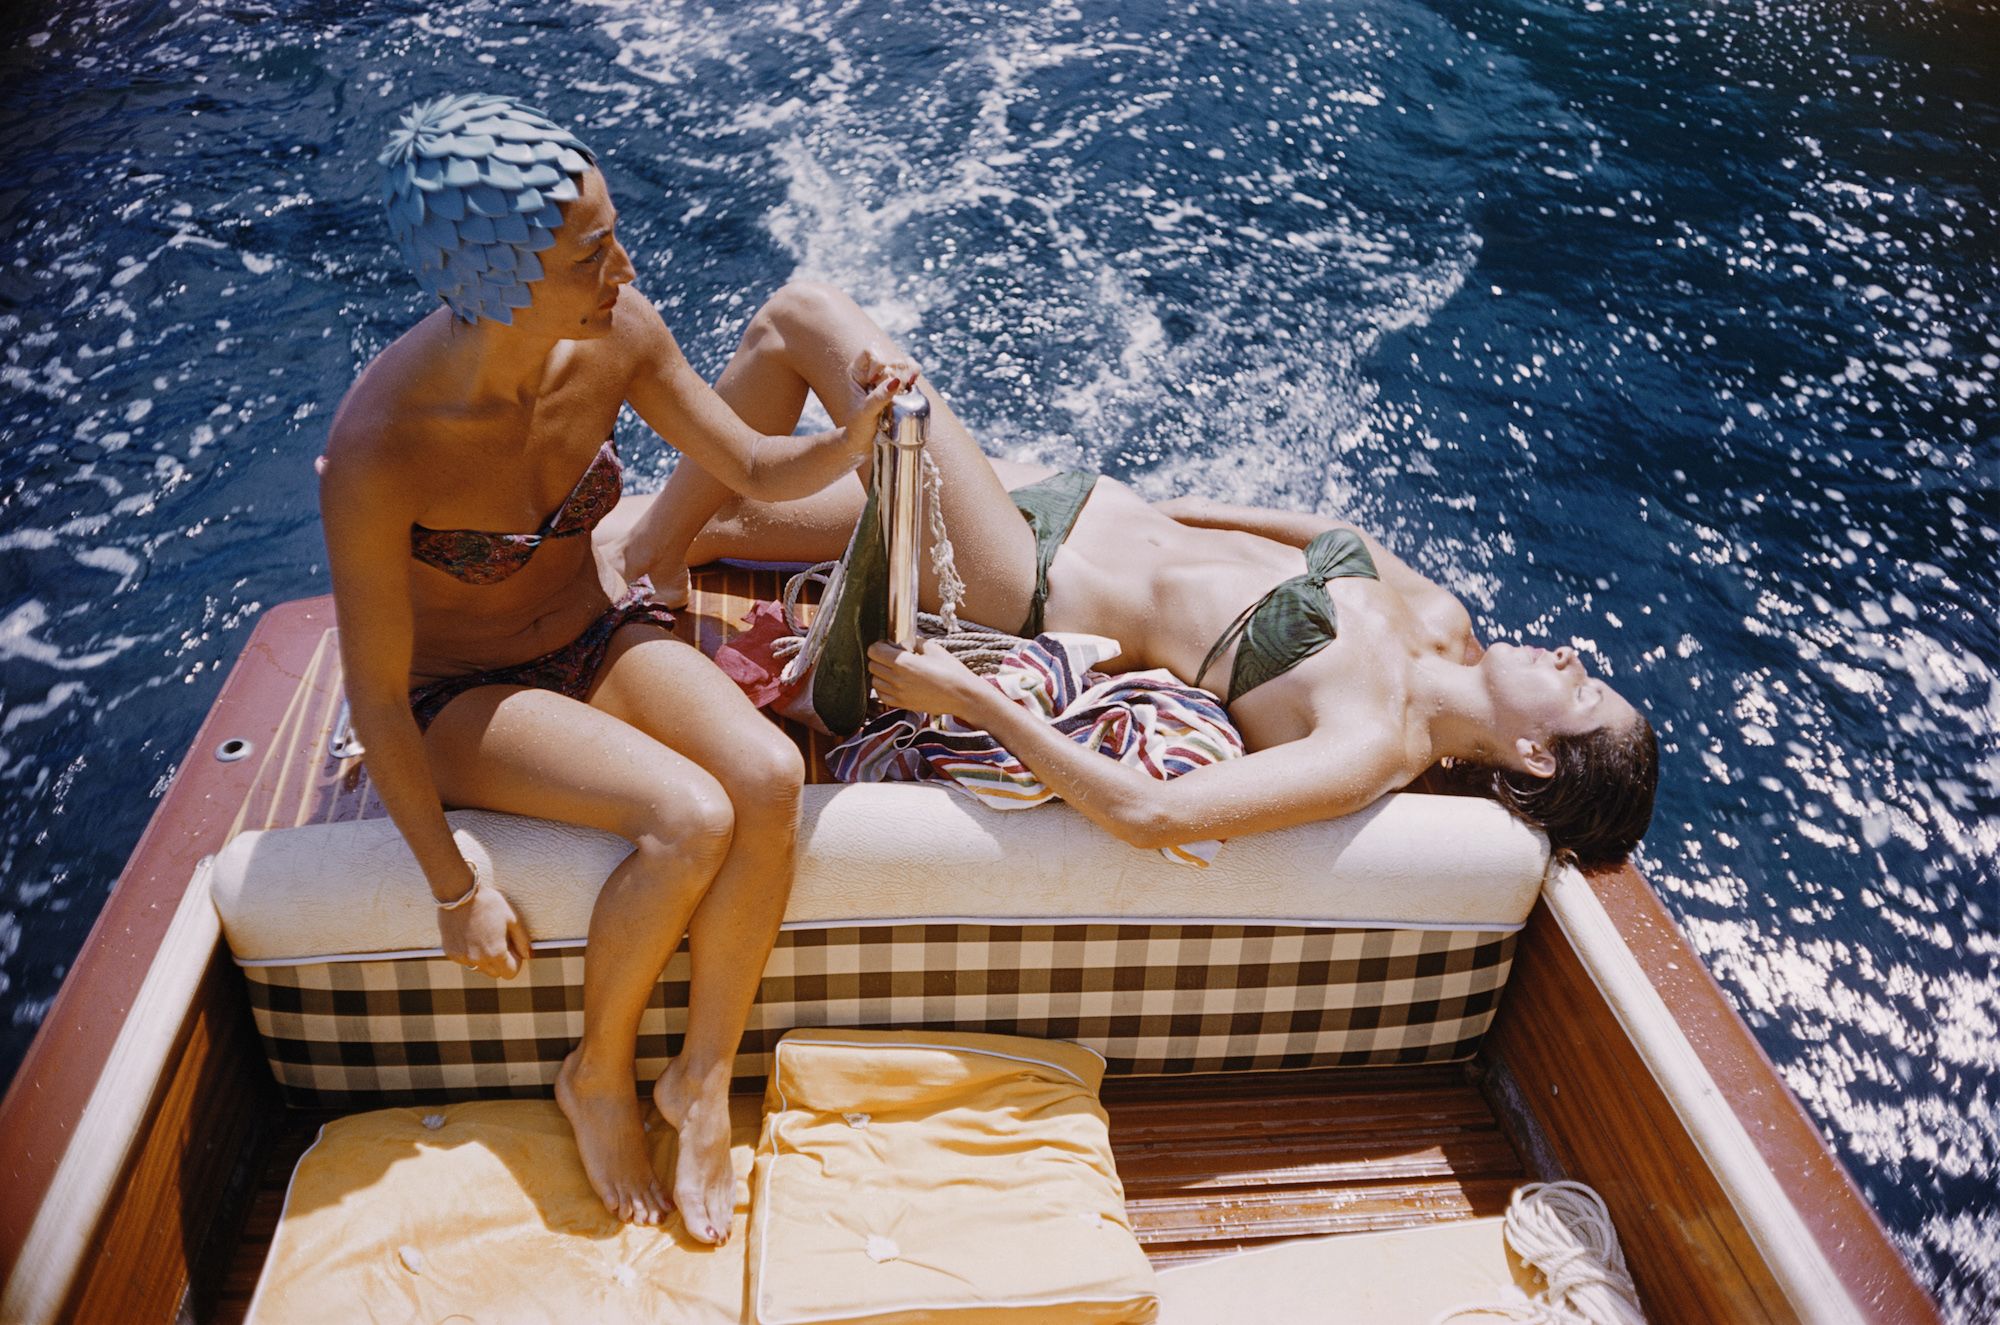 carla vuccino, wearing a swimming cap, and a sunbathing marina rava, both wearing bikinis as they sit on the rear of a boat, on the waters off the coast of the island of capri, italy, 1958  photo by slim aaronsgetty images